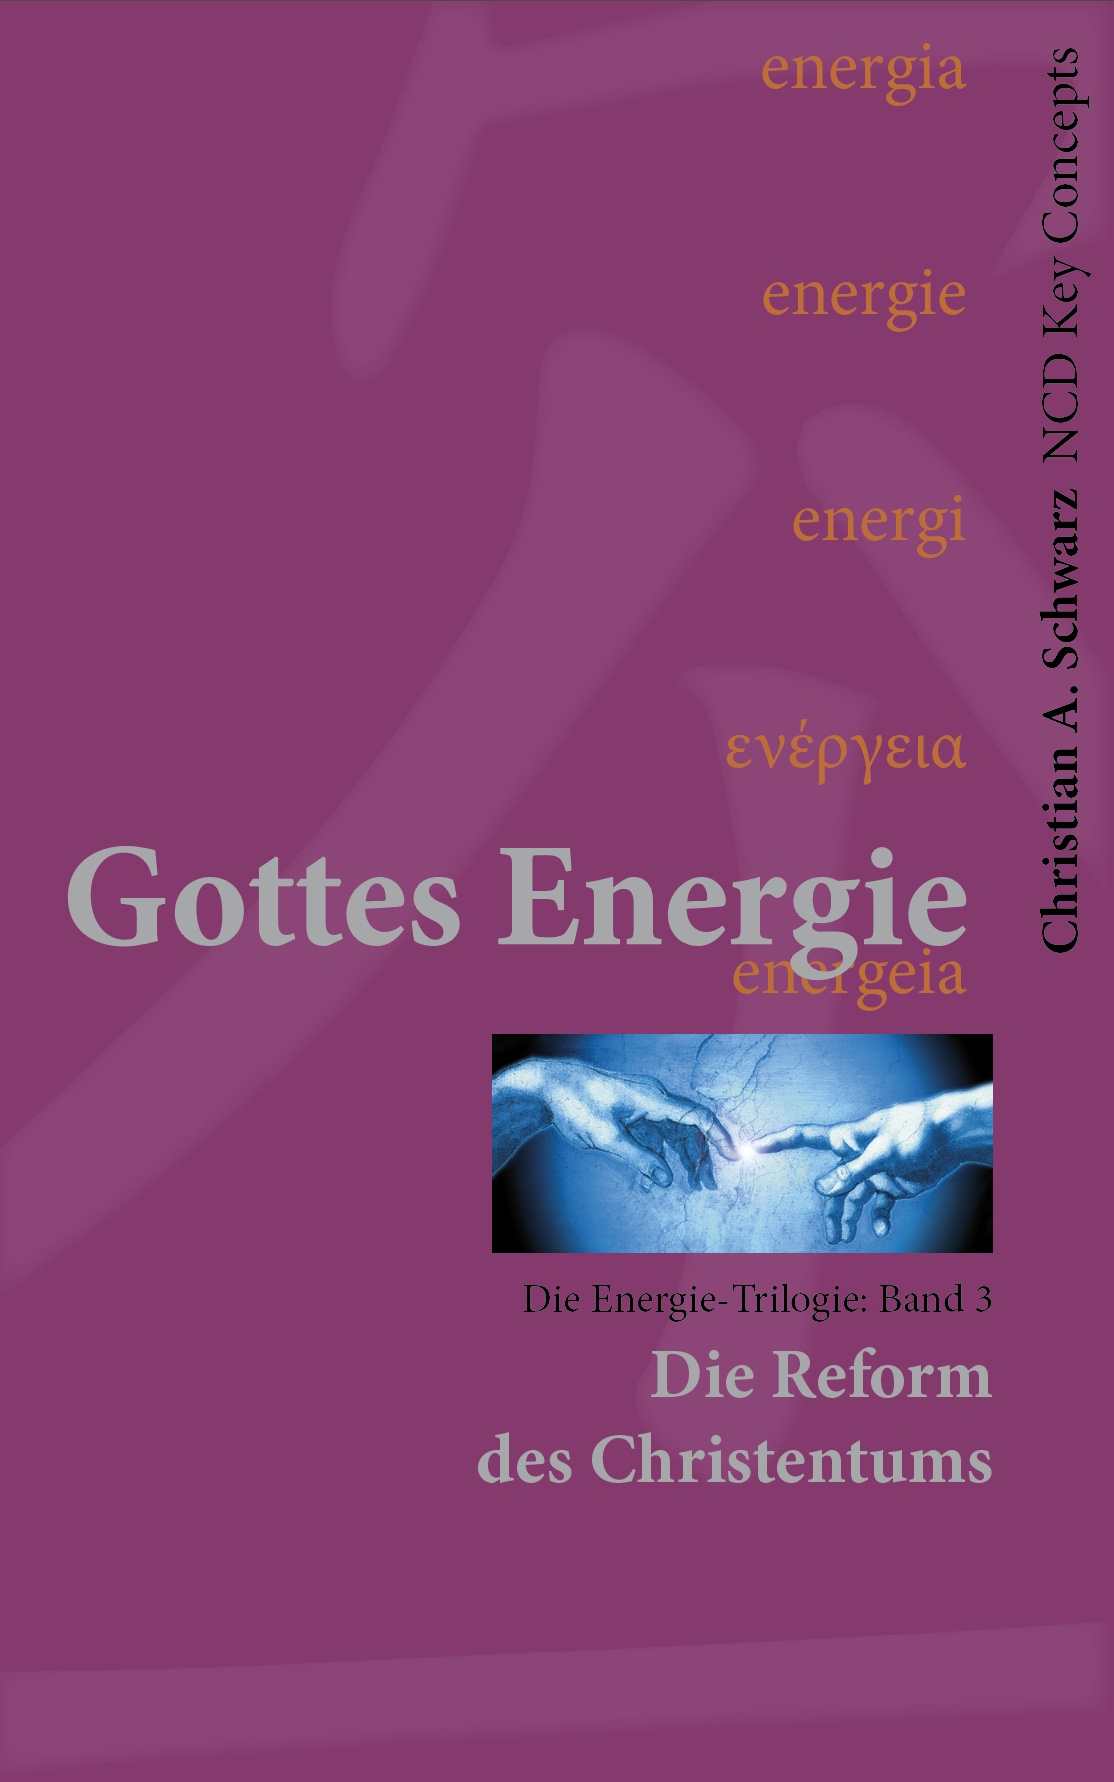 Gottes Energie—Band 3